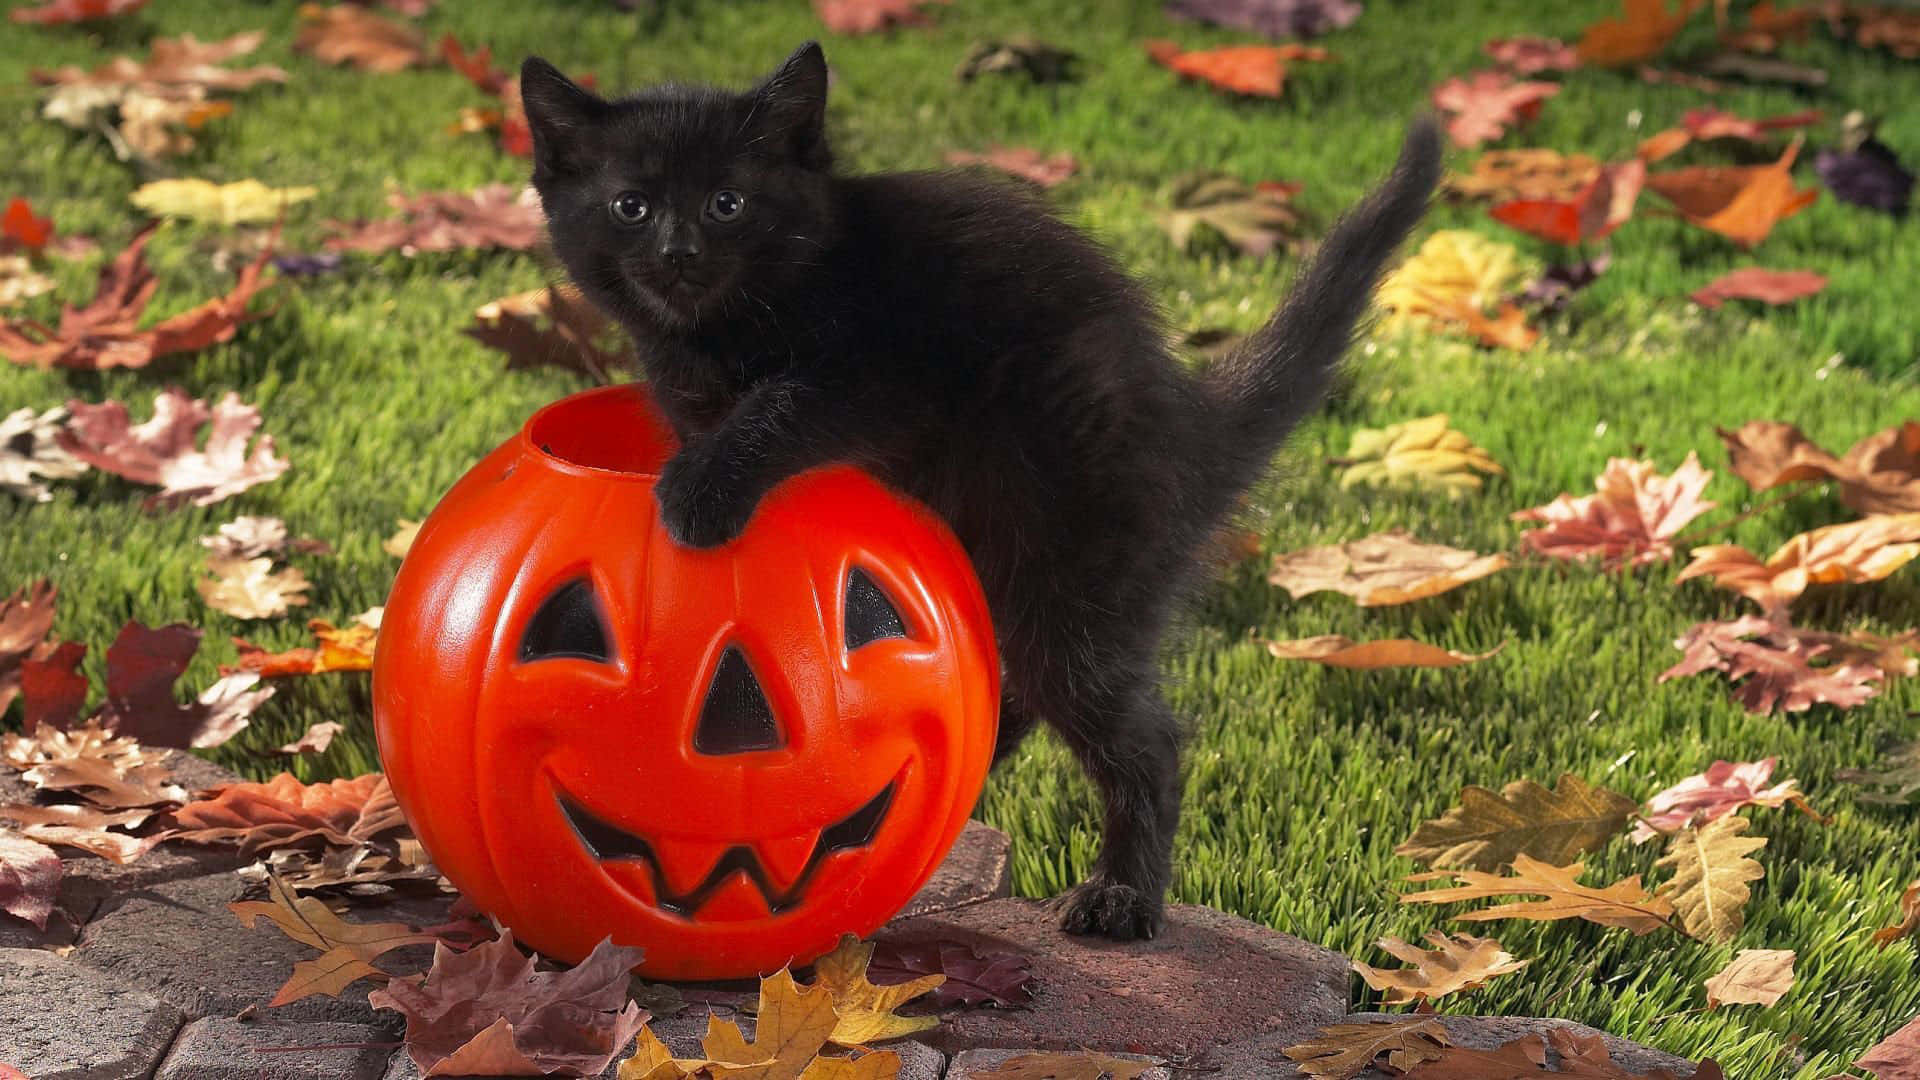 Get into the spooky spirit this Halloween season with this festive cat! Wallpaper